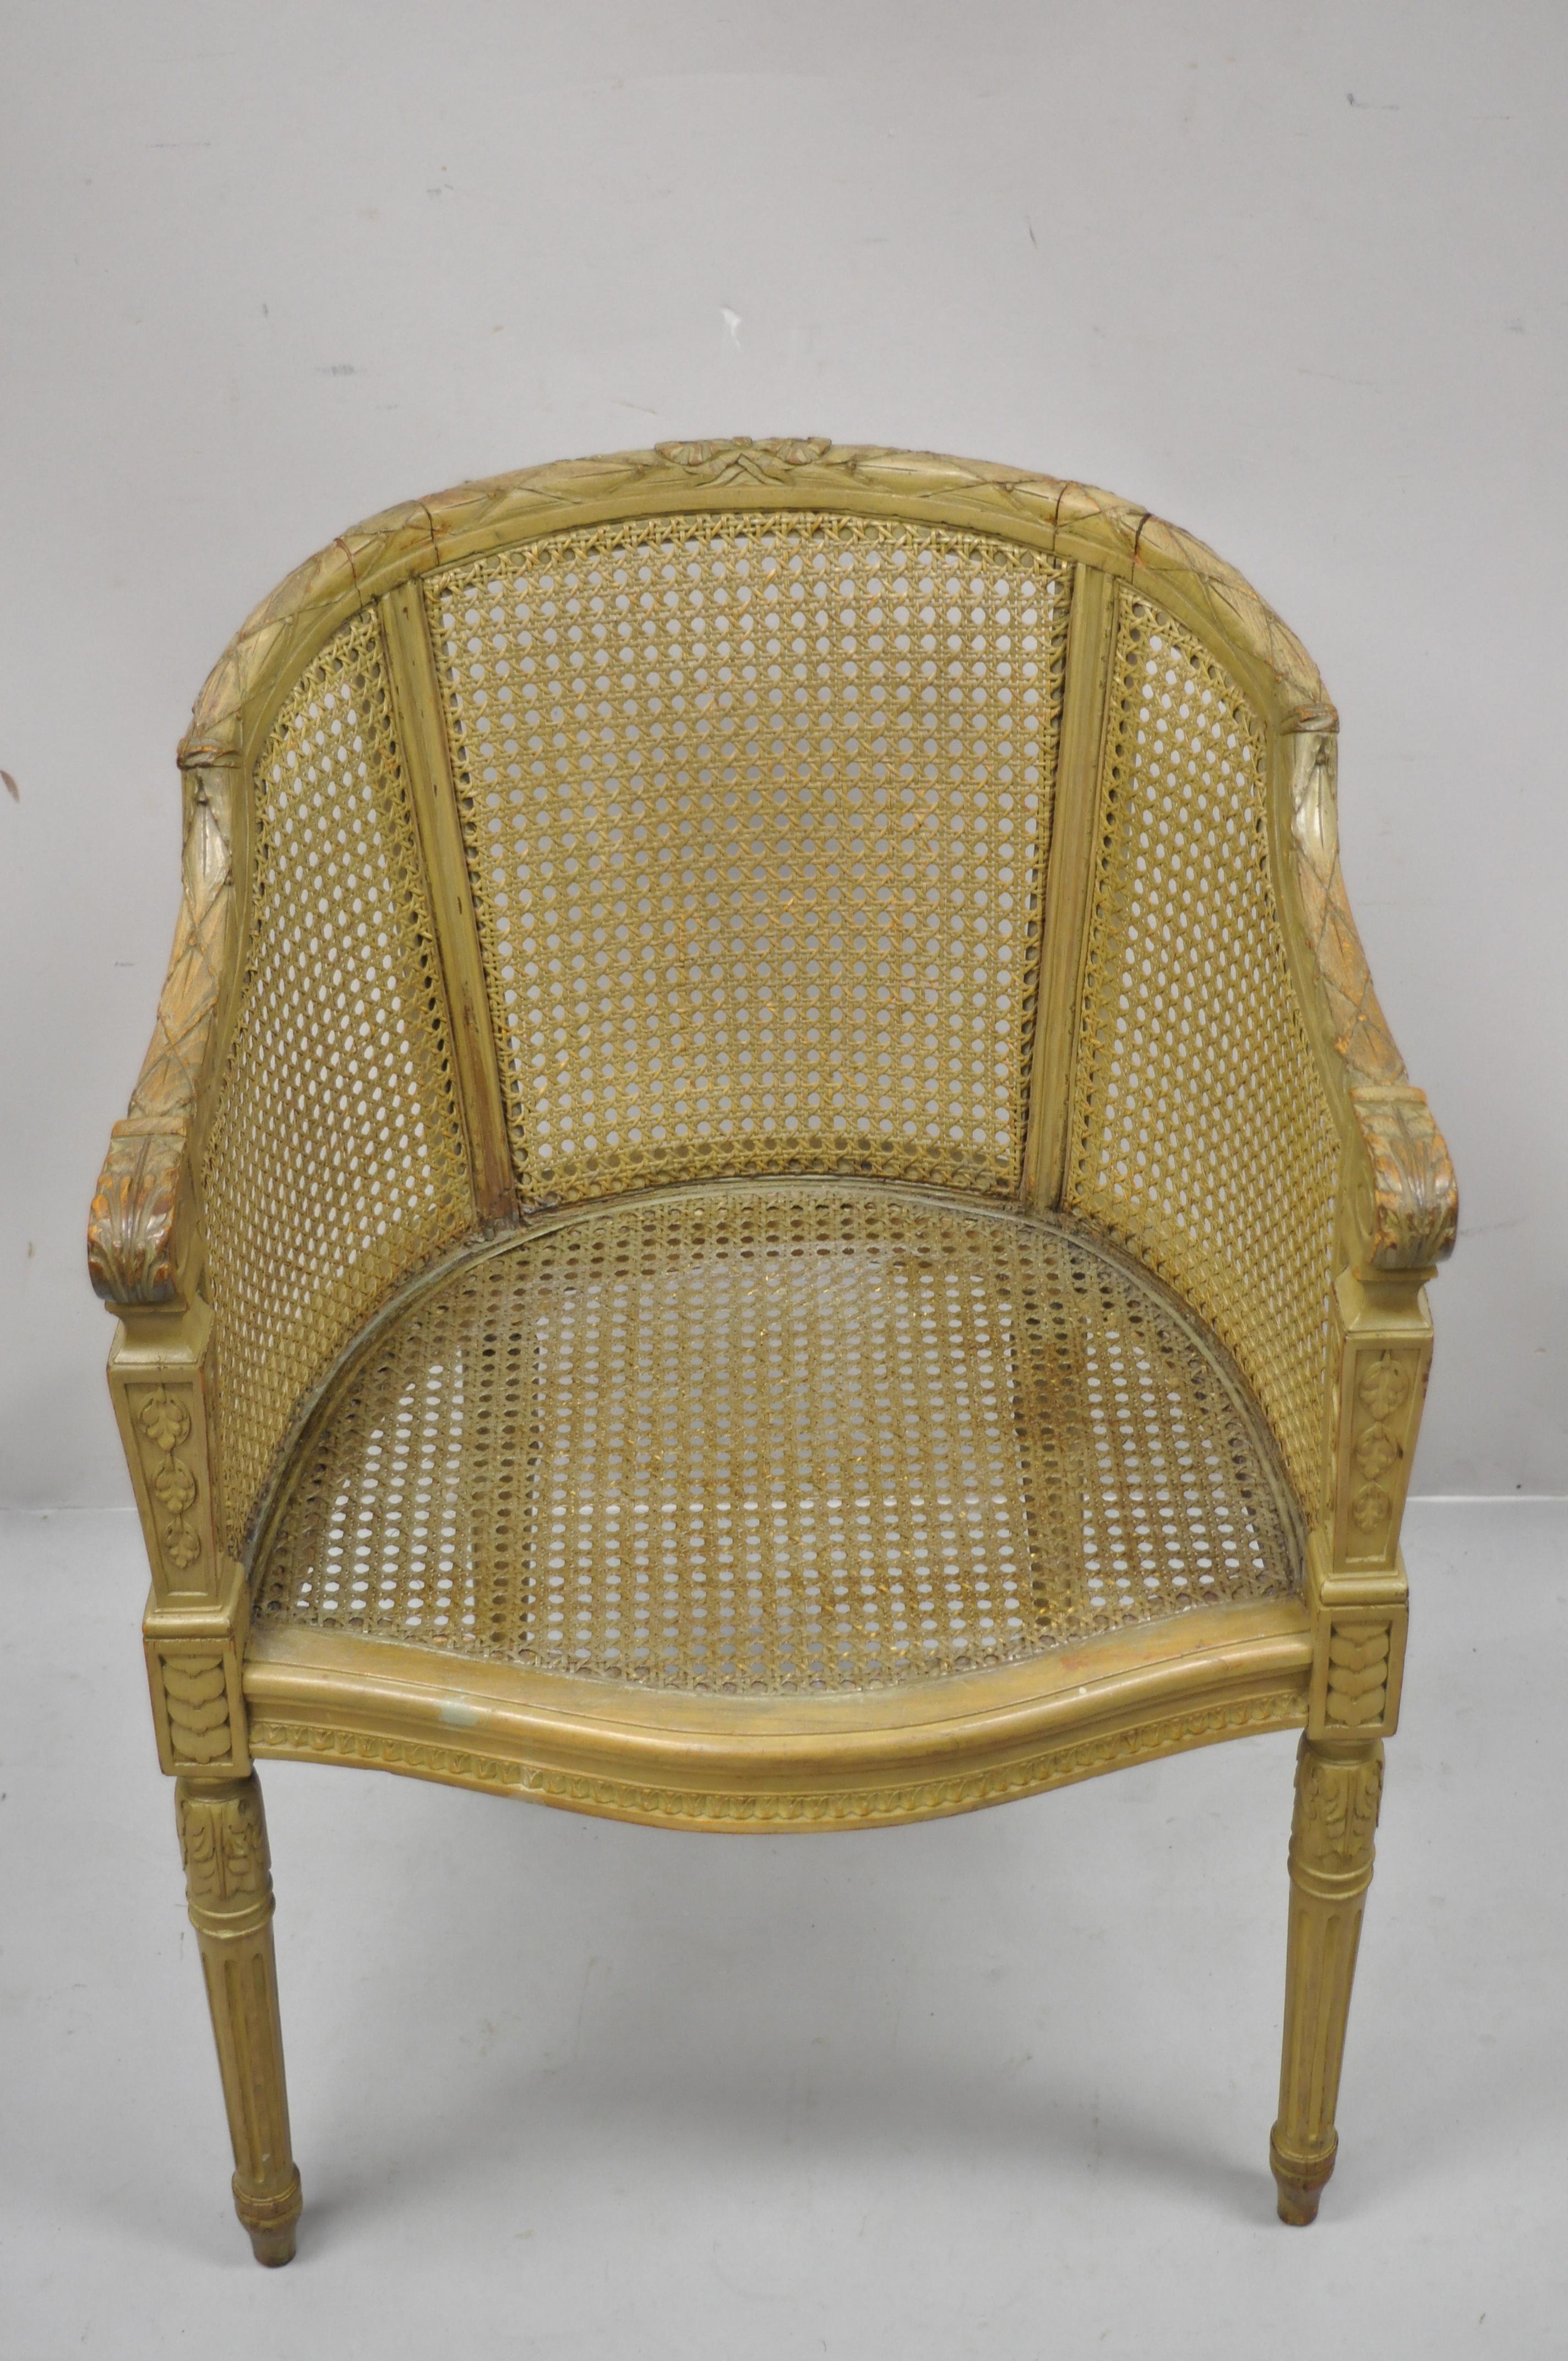 Antique French Louis XVI style carved wood cane bergere lounge arm chair. Item features cane back and sides, solid wood frame, nicely carved details, tapered legs, quality French craftsmanship, great style and form. Circa Early 1900s. Measurements: